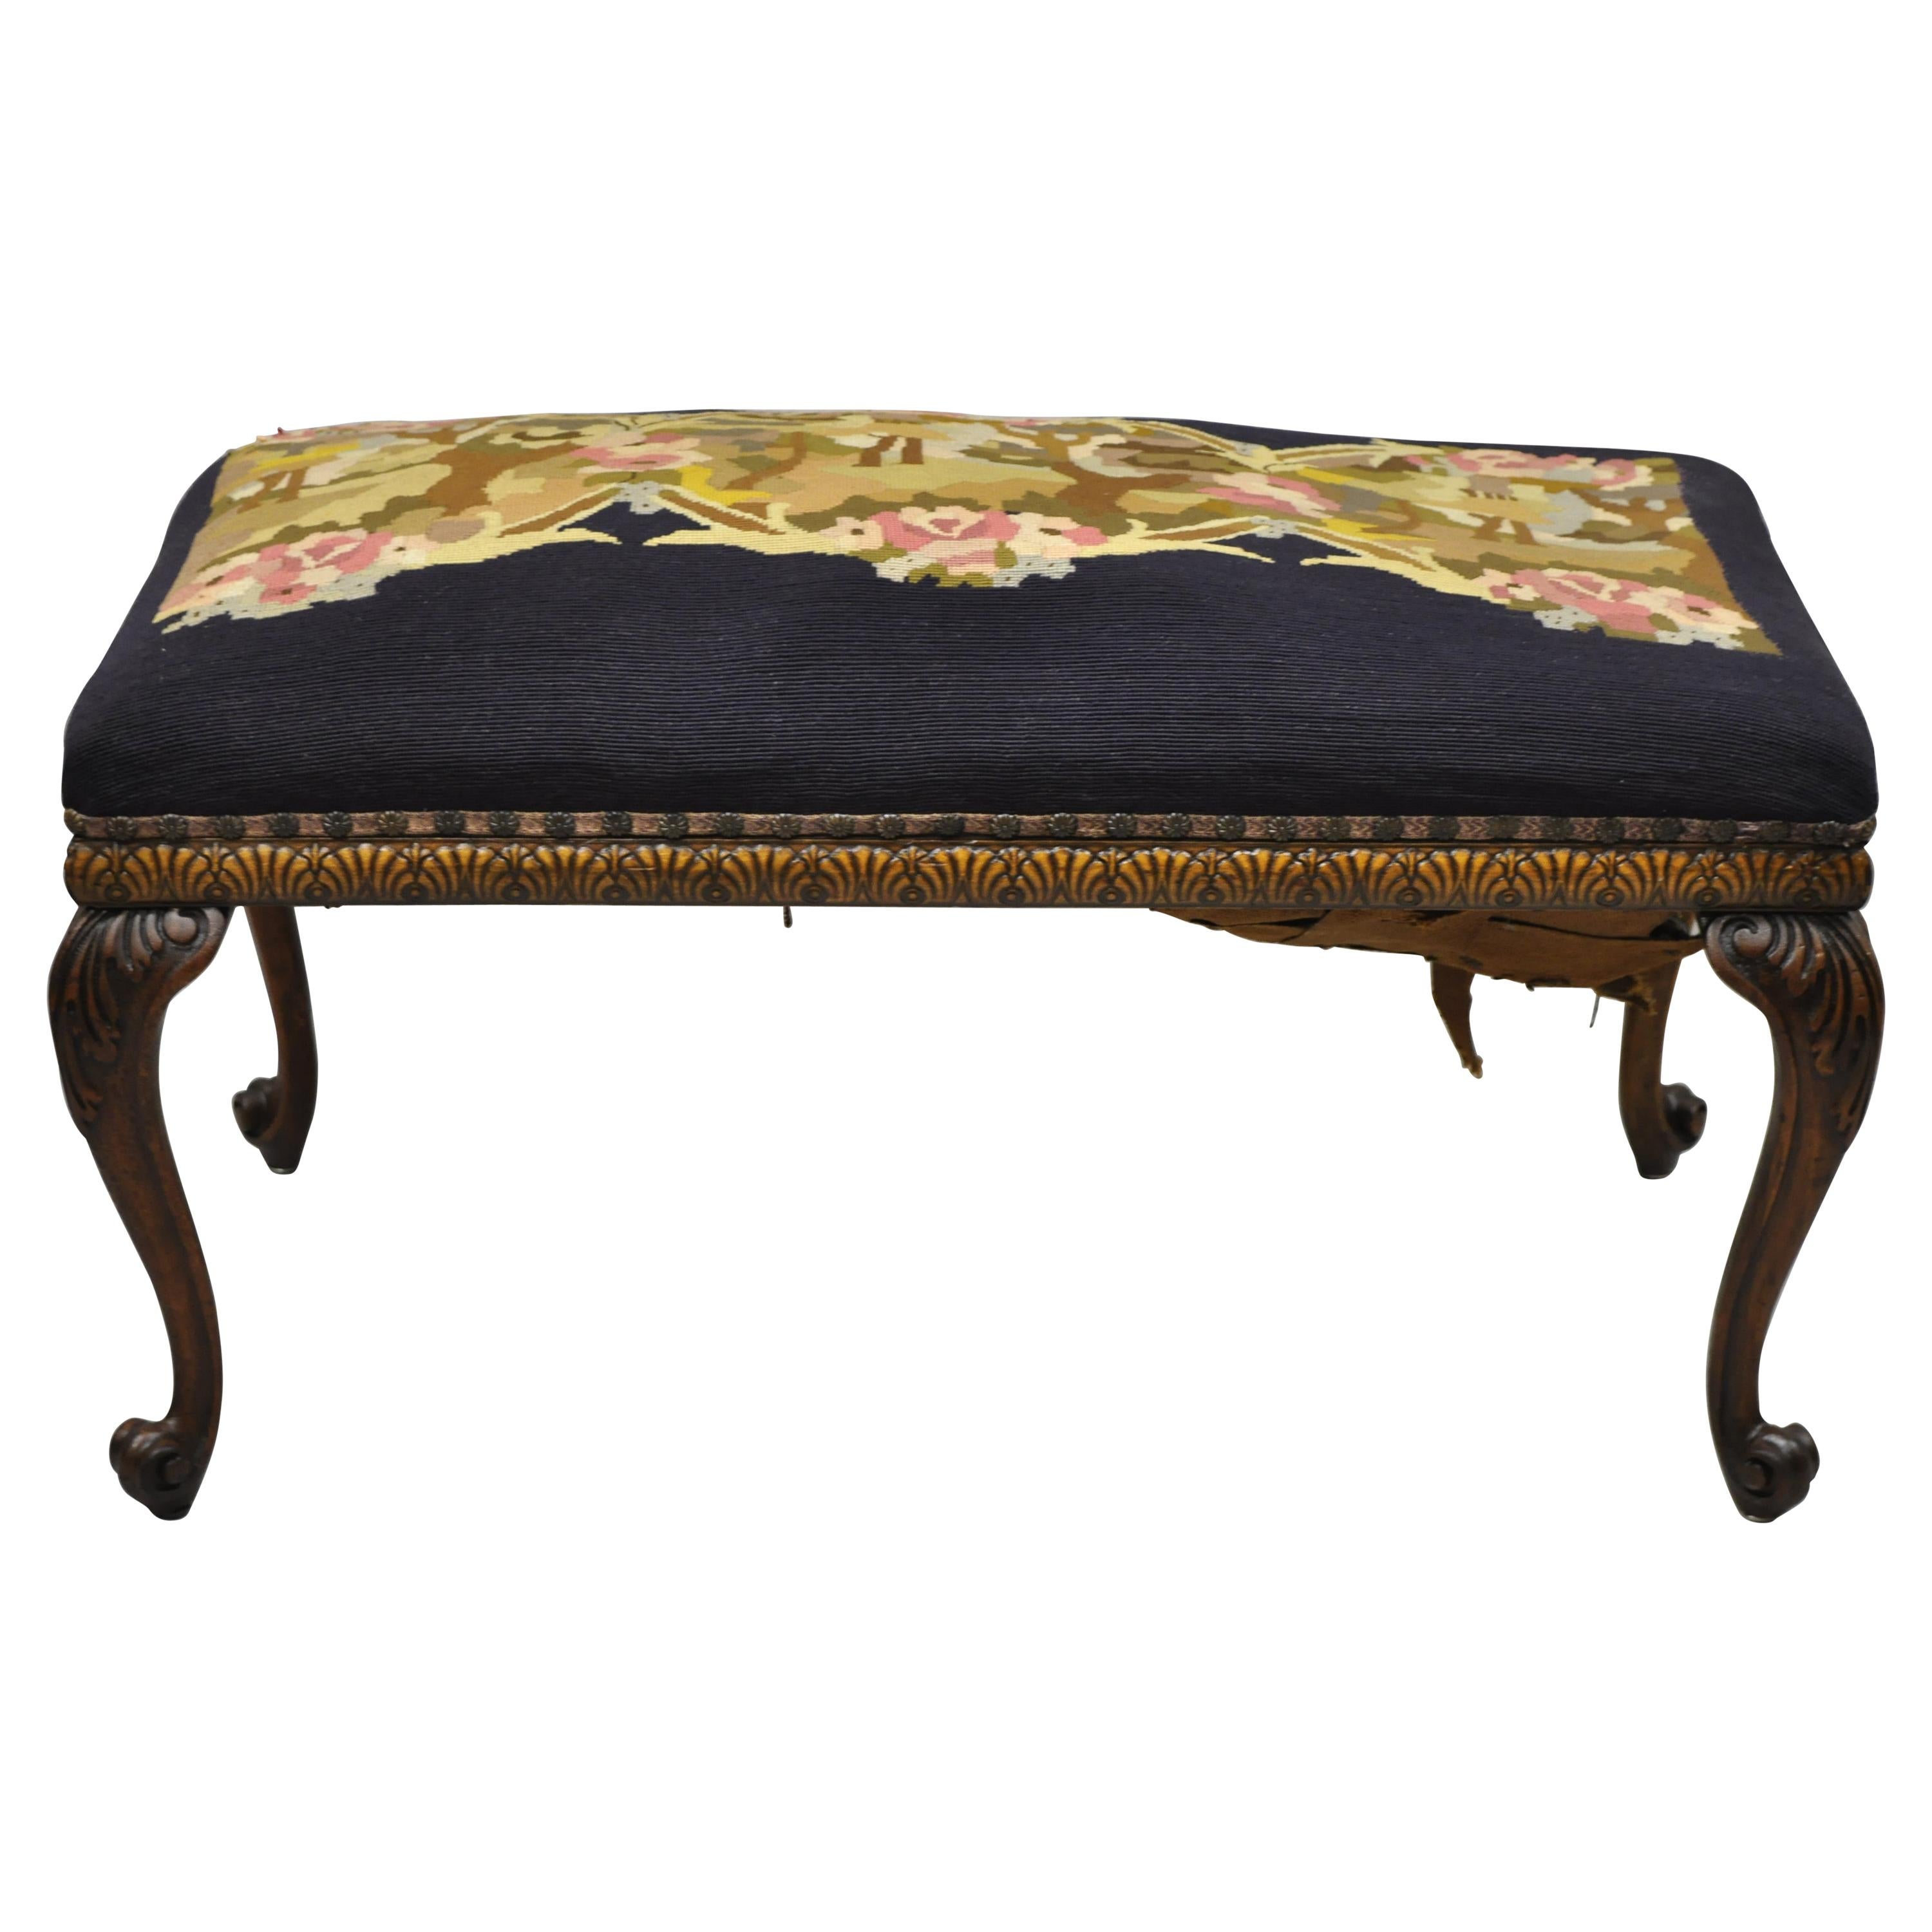 Vintage French Needlepoint Bench For Sale at 1stDibs